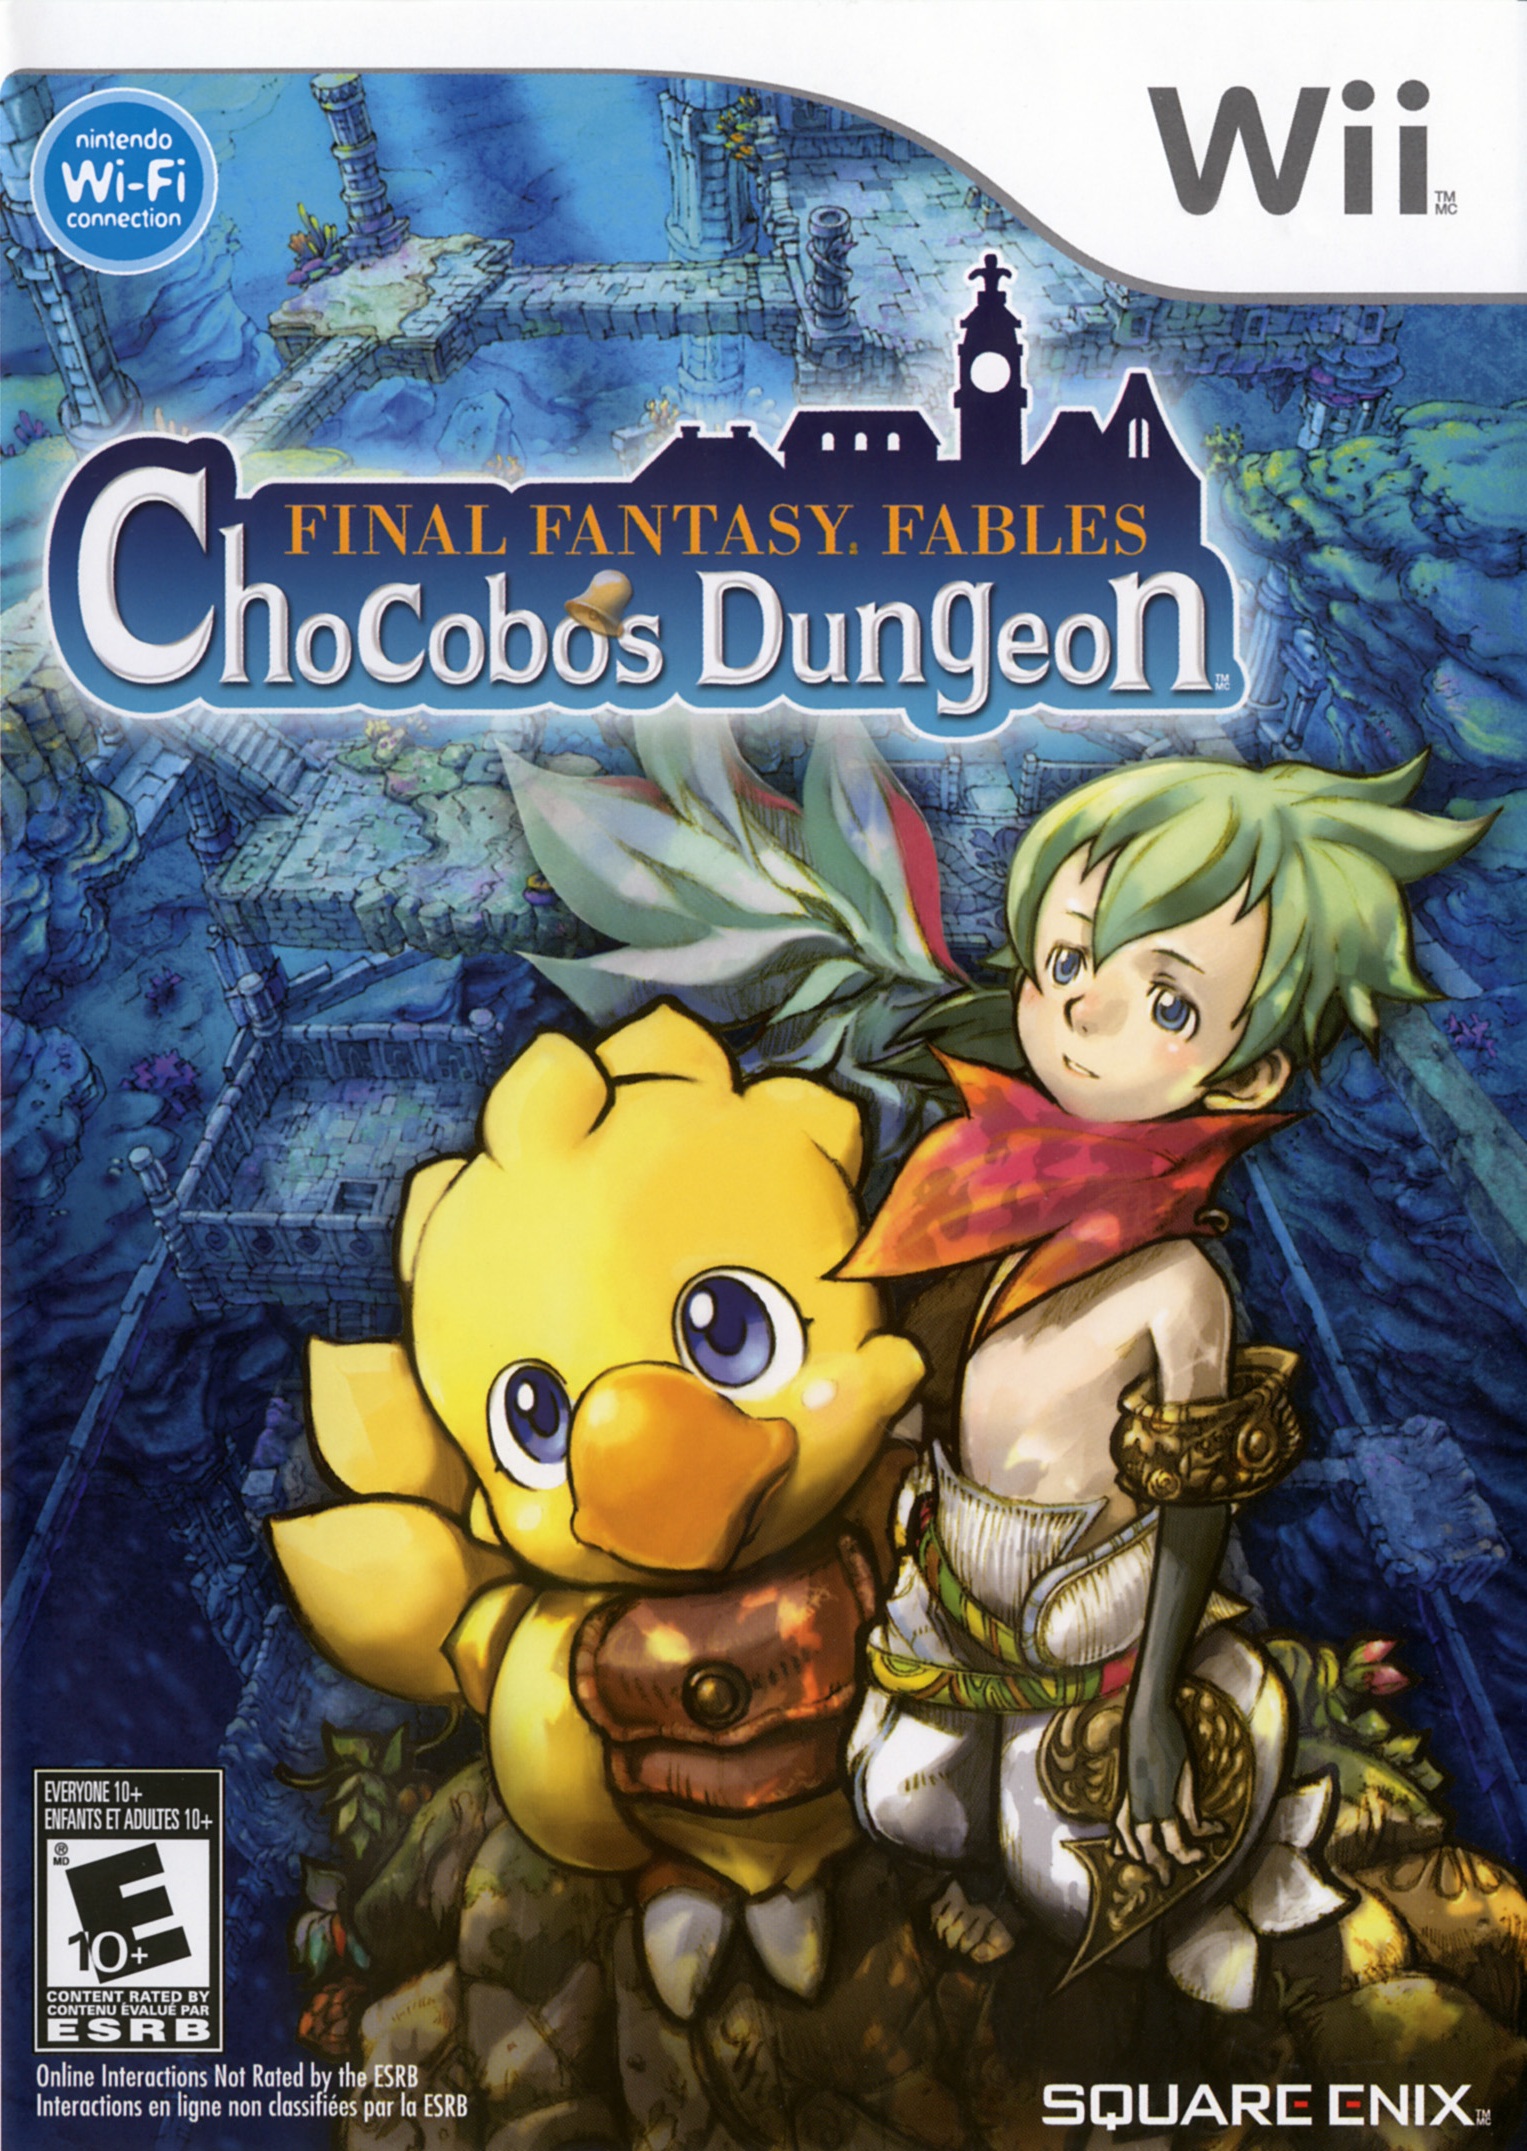 Final Fantasy Fables- Chocobos Dungeon.jpg